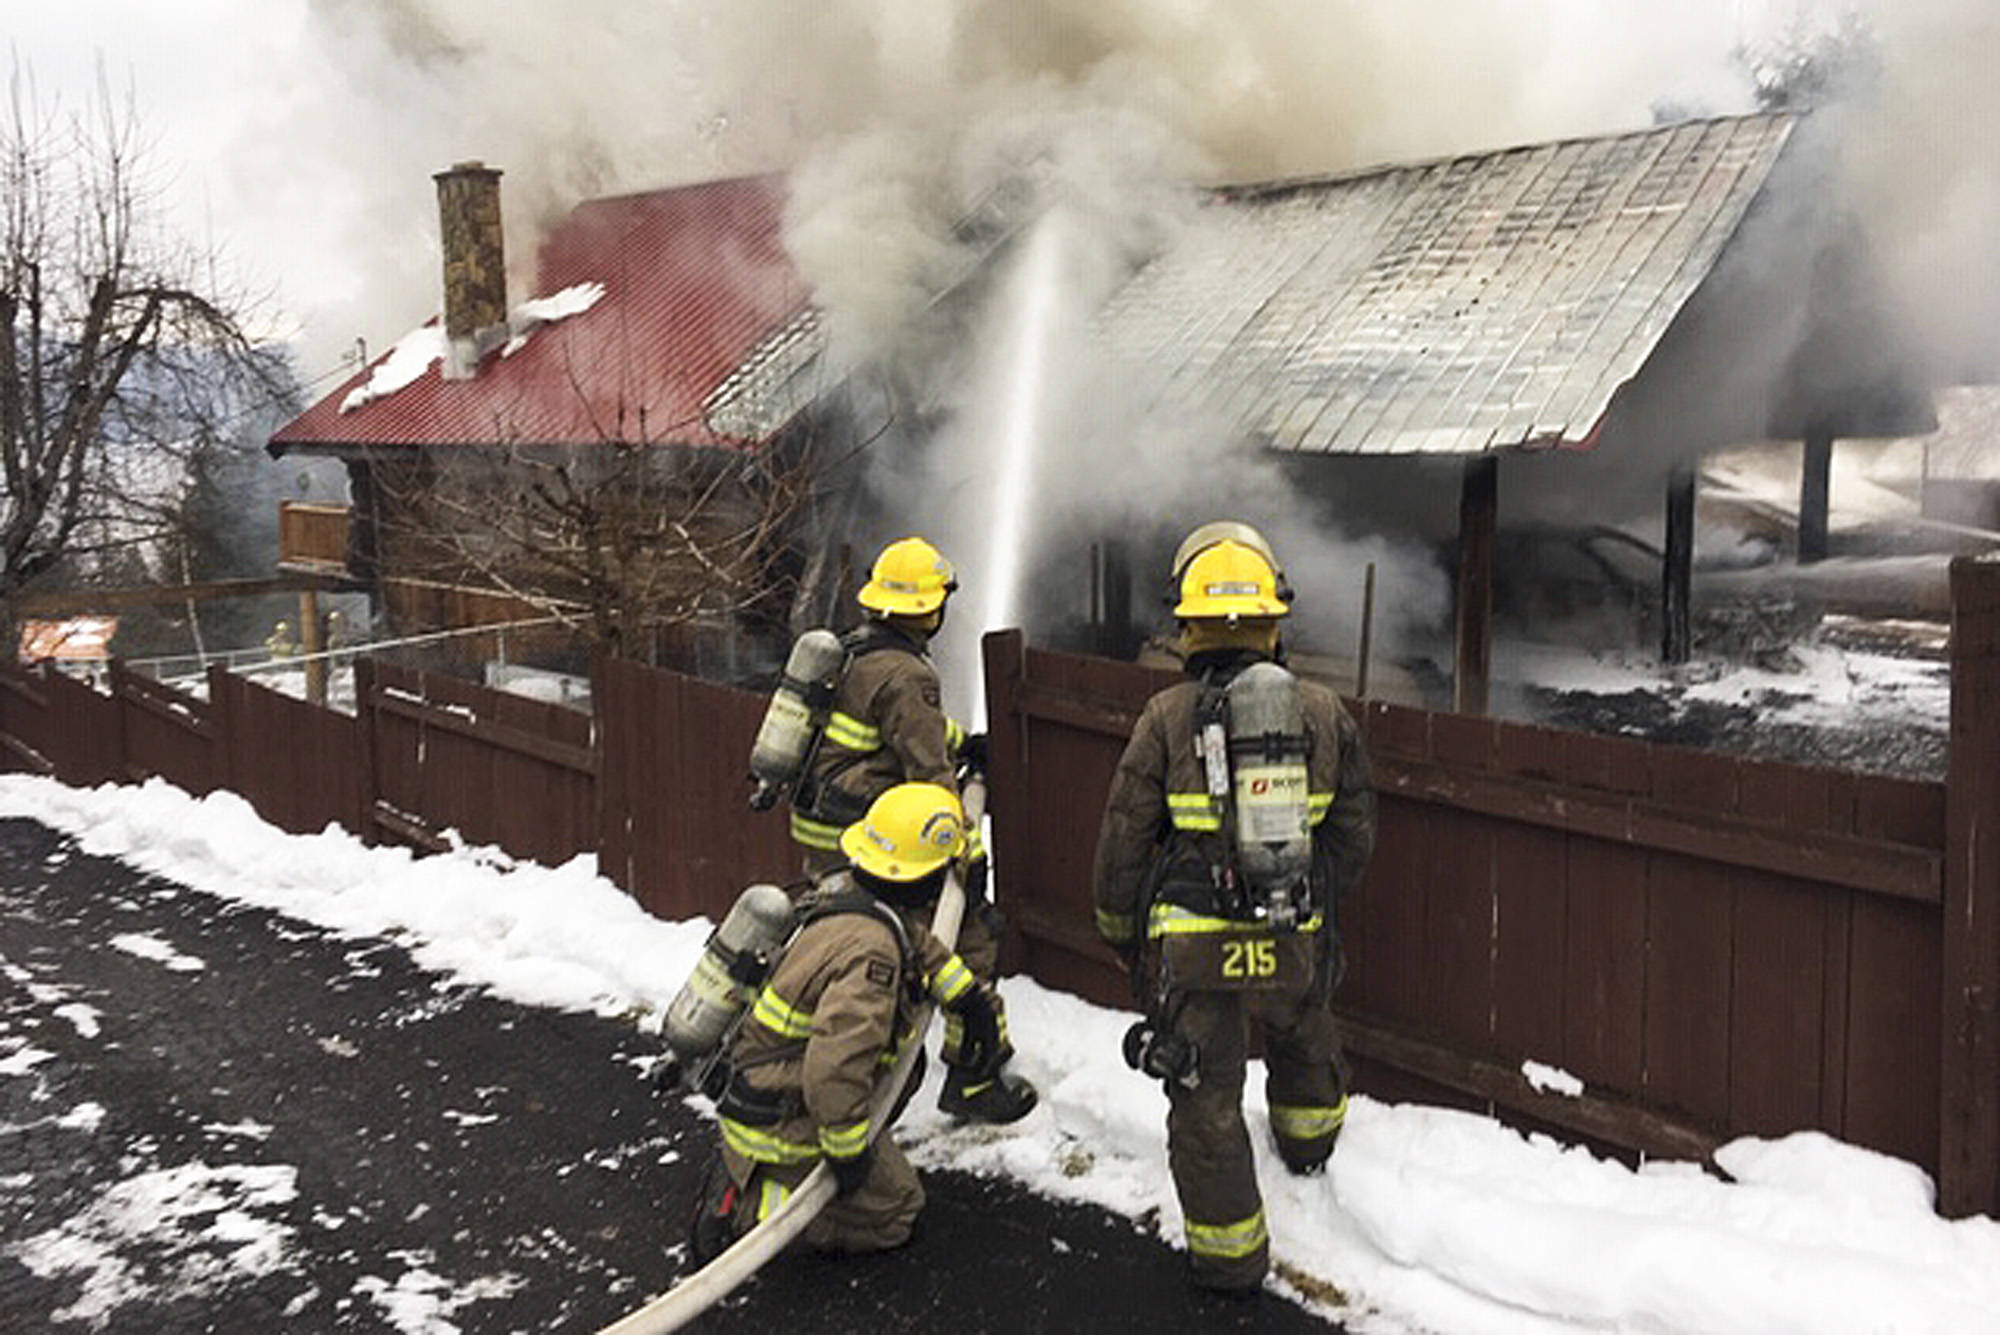 Columbia Shuswap Regional District firefighters attack a blaze in a home on Centennial Road in Blind Bay on Monday, Jan. 14.                                (Sean Coubrough photo)